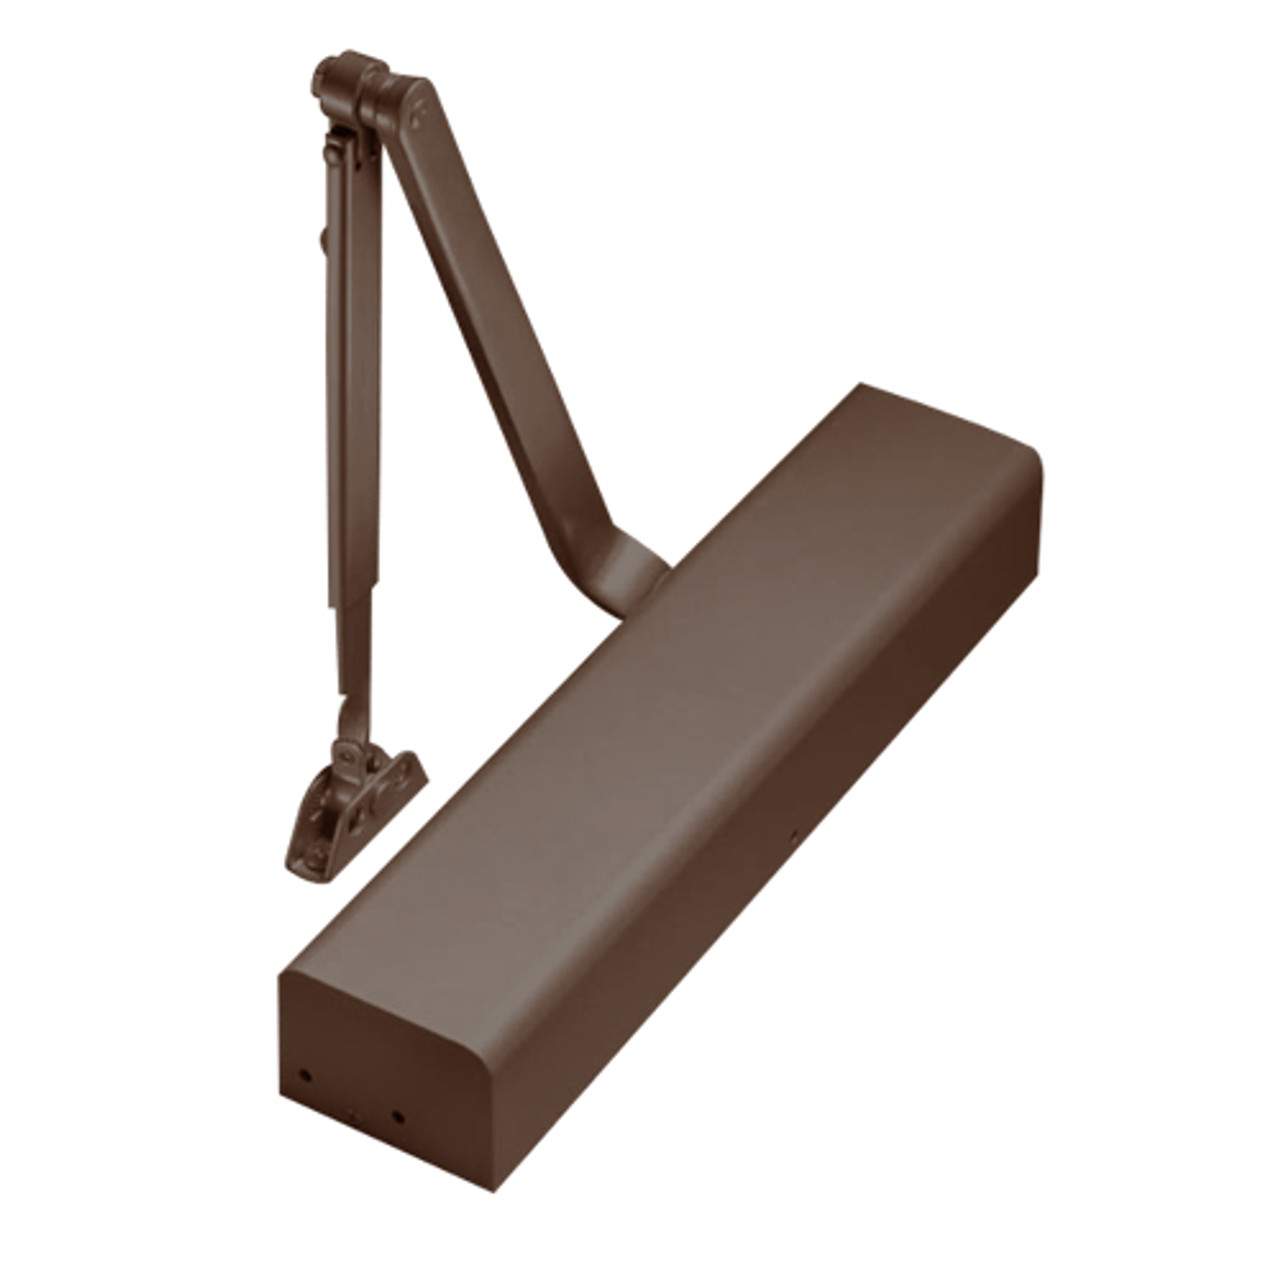 3511-690 Yale 3000 Series Architectural Door Closer with Regular Parallel and Top Jamb to 3" Reveal in Dark Bronze